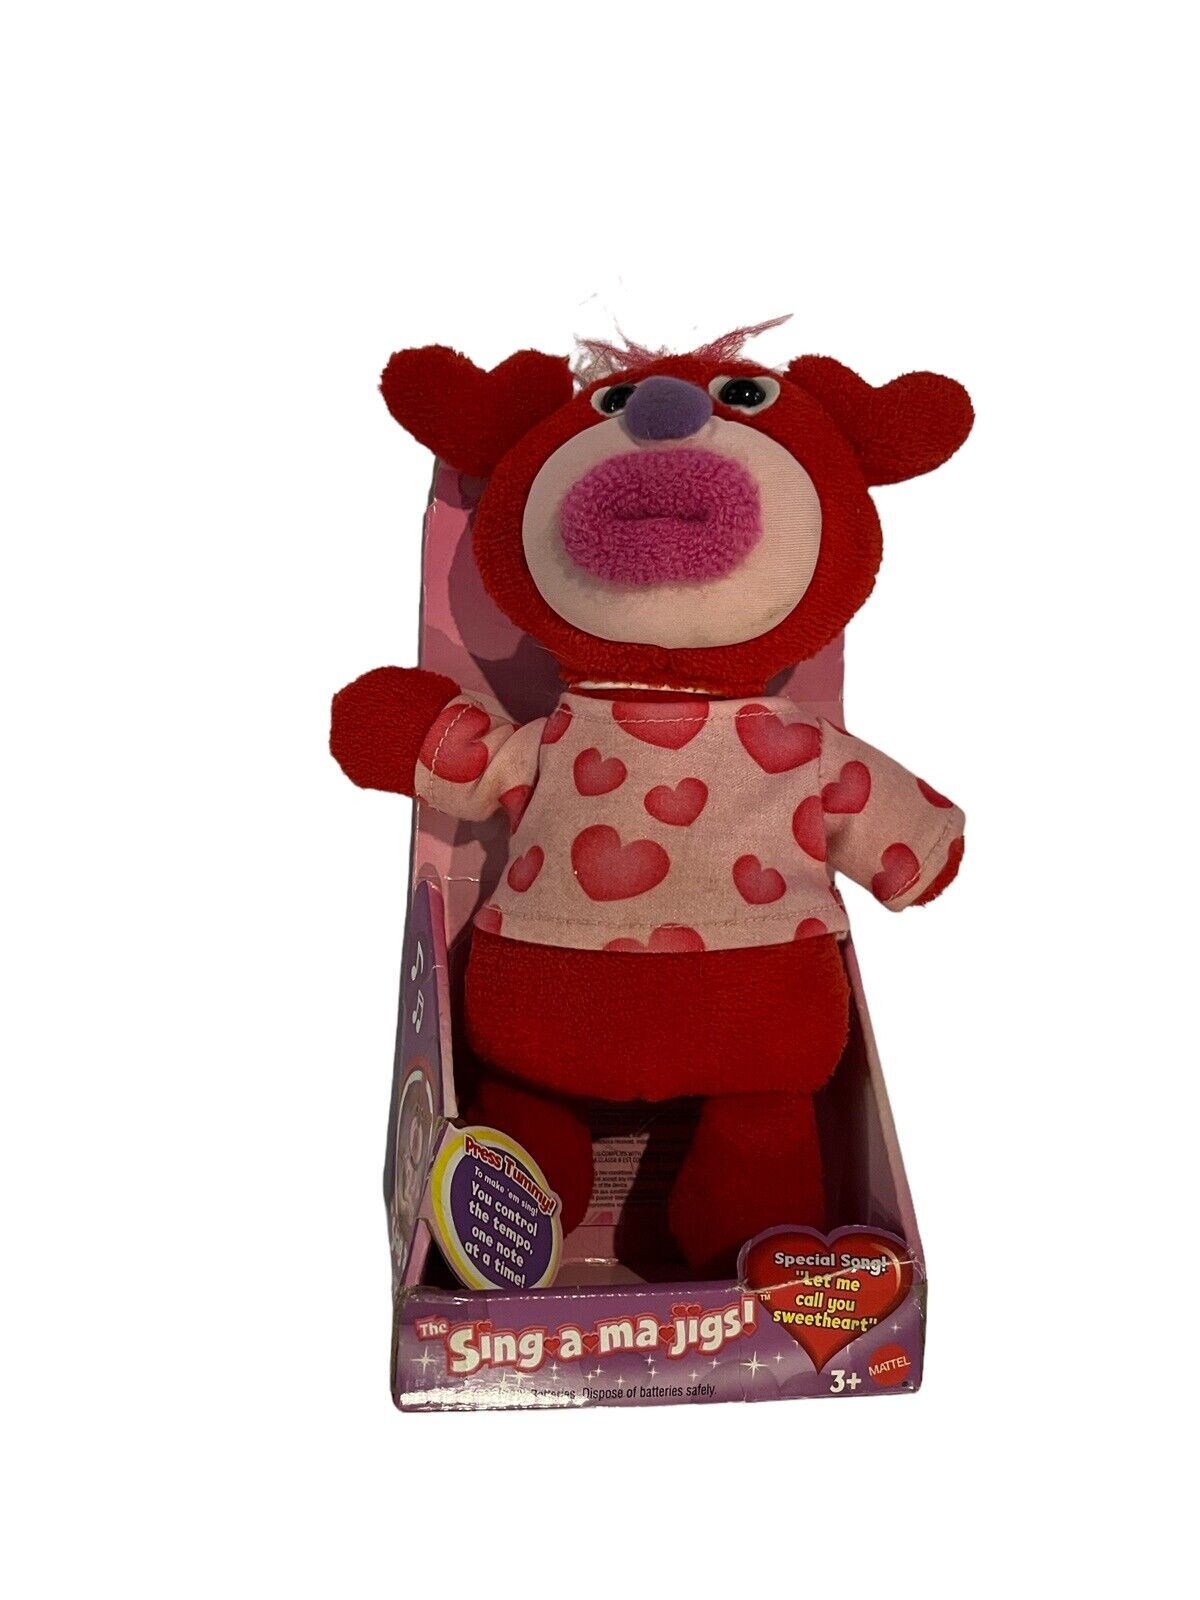 Sing A Ma Jigs Valentine’s Day Plush Let Me Call You Sweetheart Song 2010 Mattel